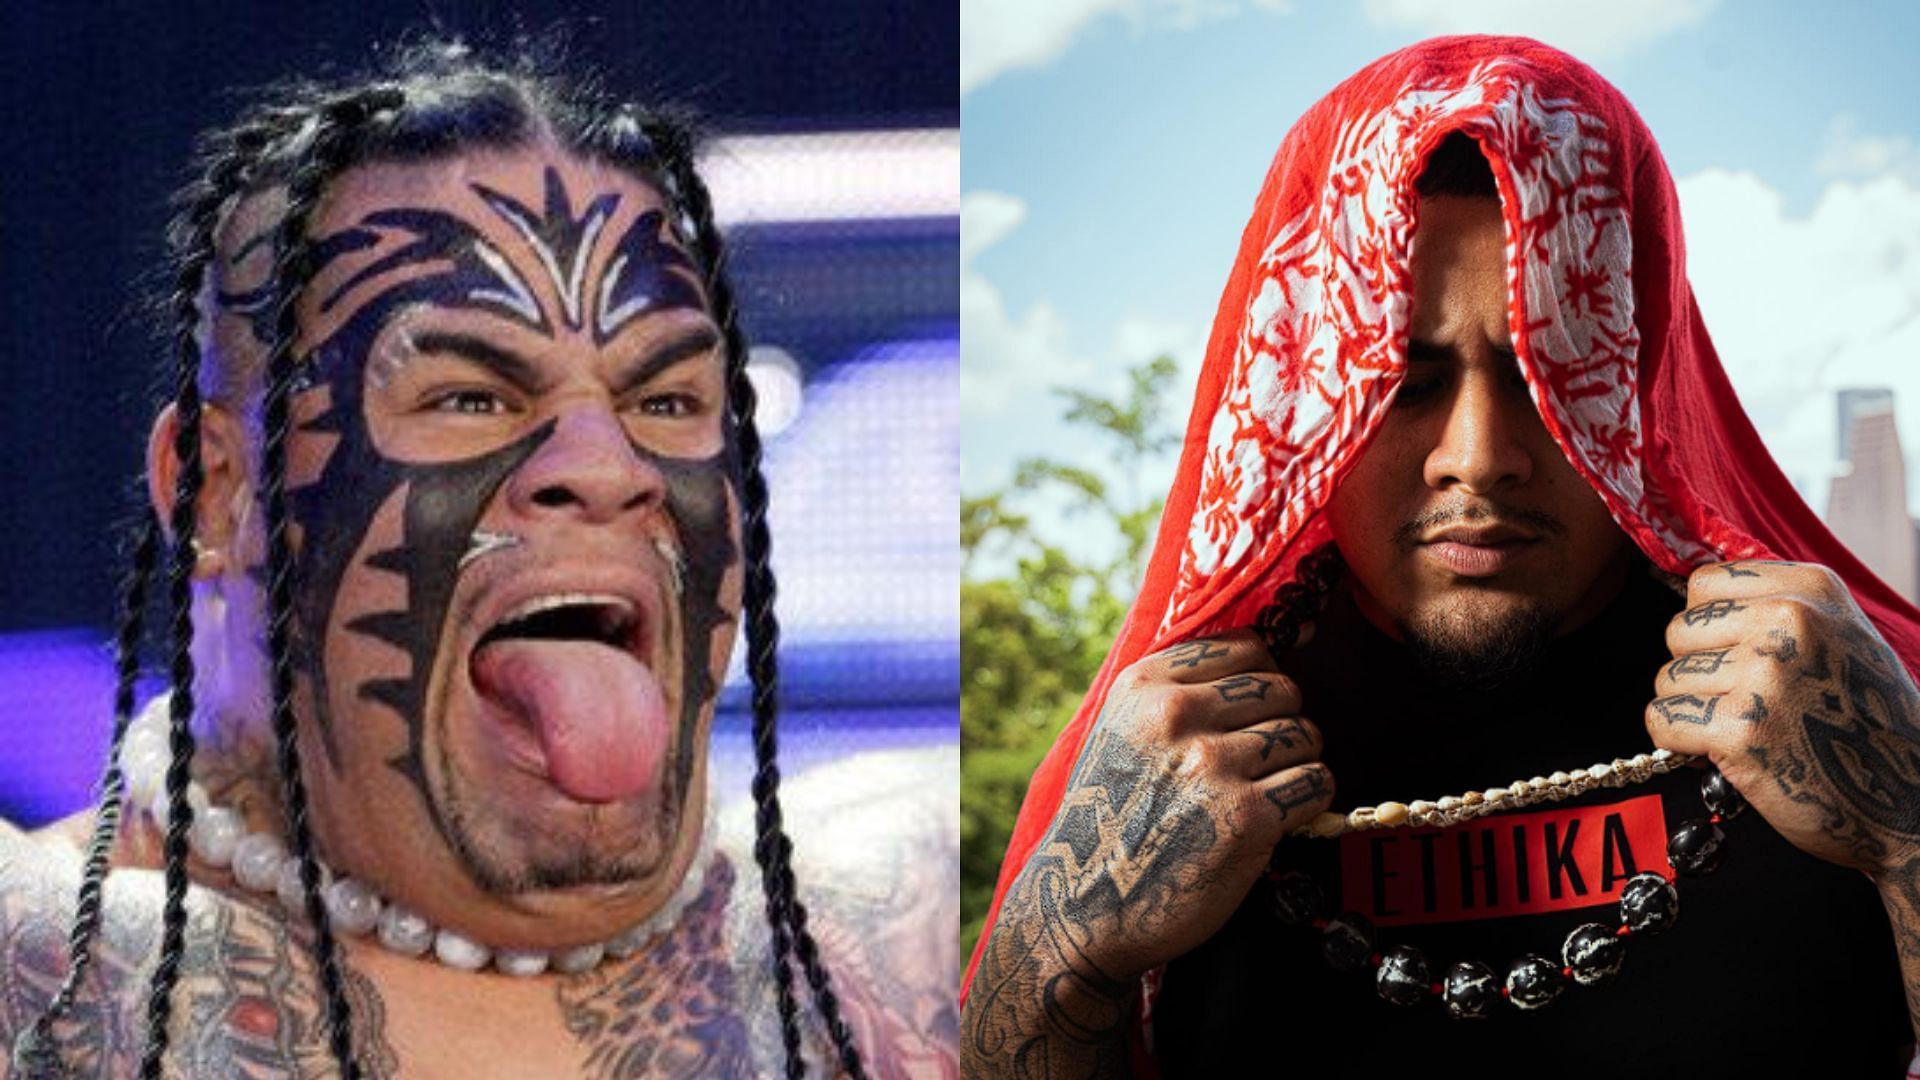 Umaga was a WWE legend who was known for his time with the company in the 90s to 2000s [Photos courtesy of WWE